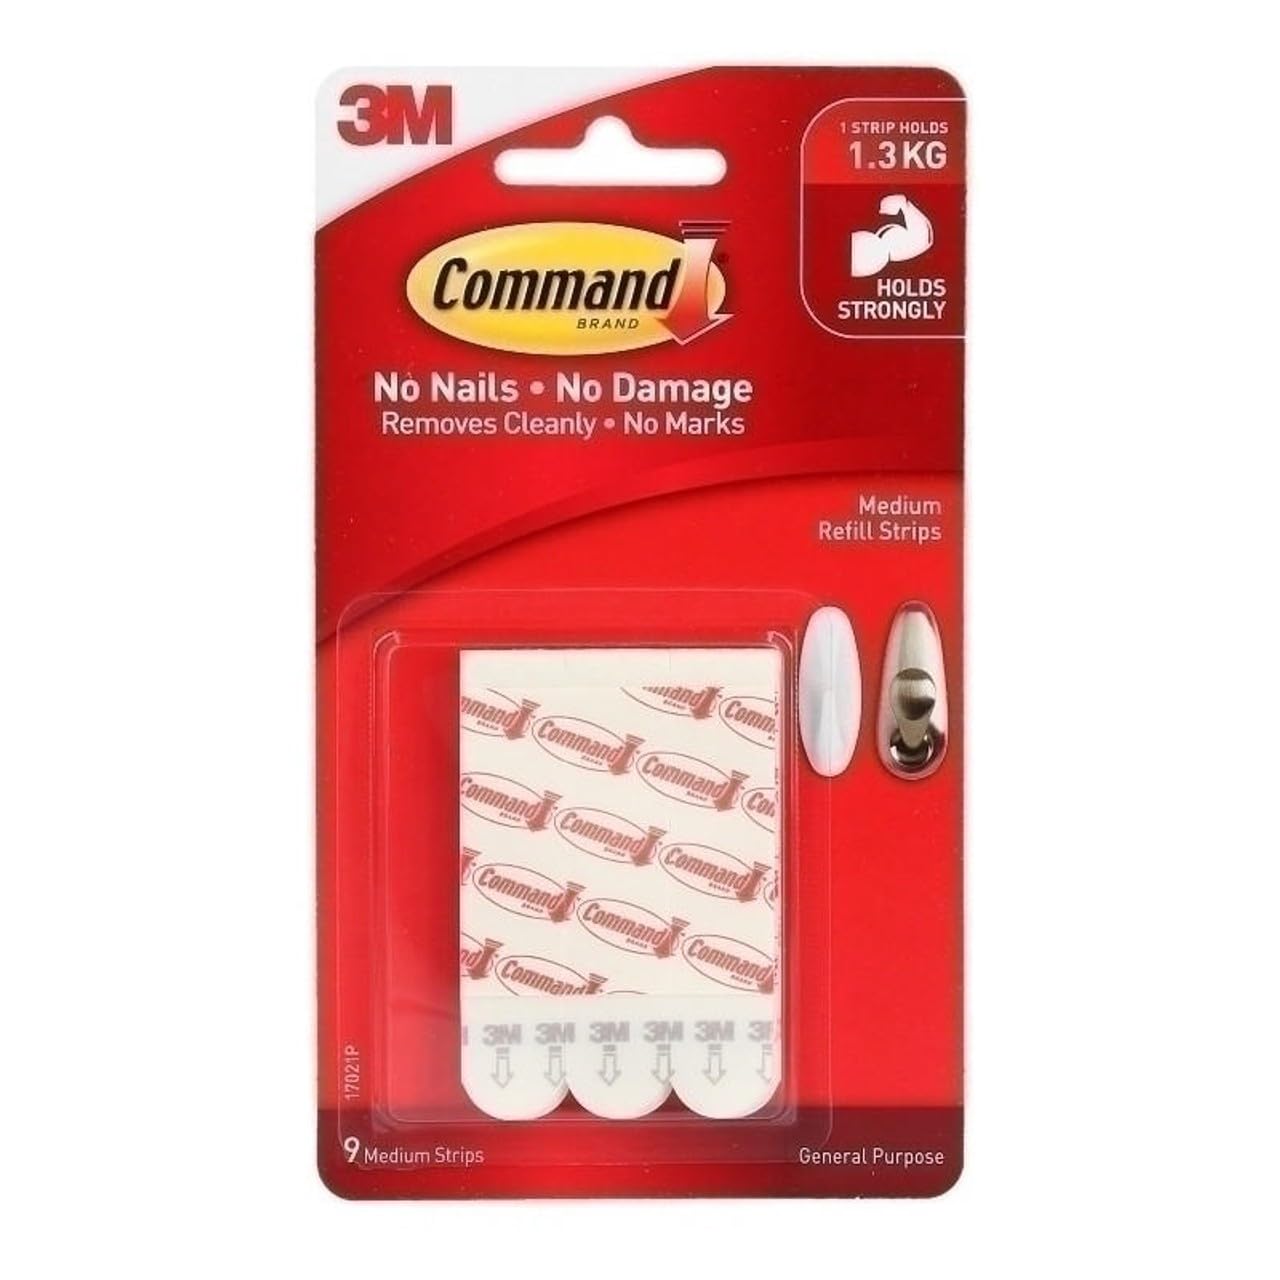 9-Count Command Medium Refill Adhesive Strips $1.79 + Free Shipping w/ Prime or on $35+